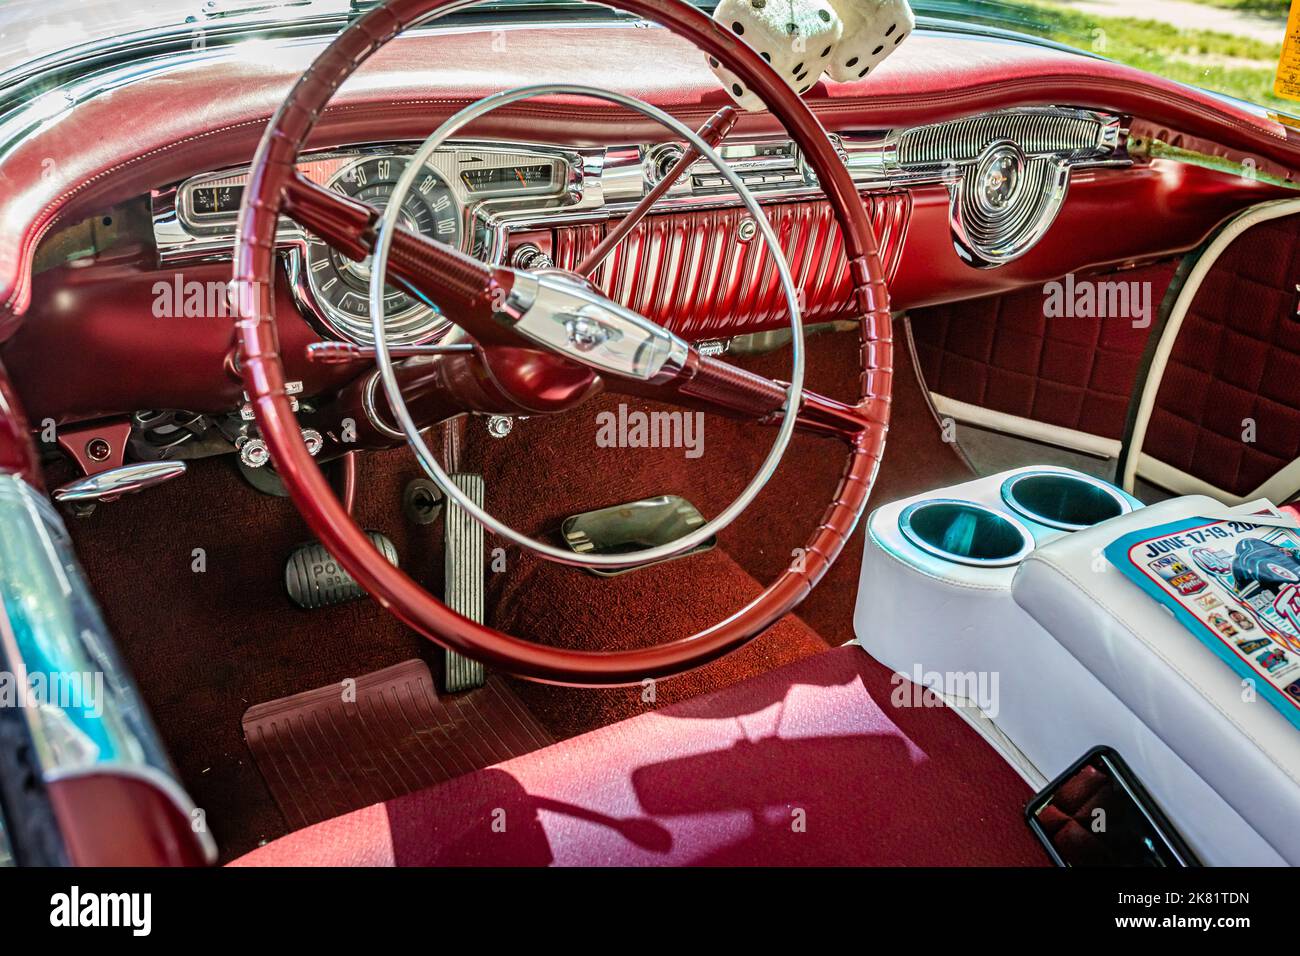 Falcon Heights, MN - June 19, 2022: Close up detail interior view of a 1954 Oldsmobile 98 Holiday Hardtop Coupe at a local car show. Stock Photo